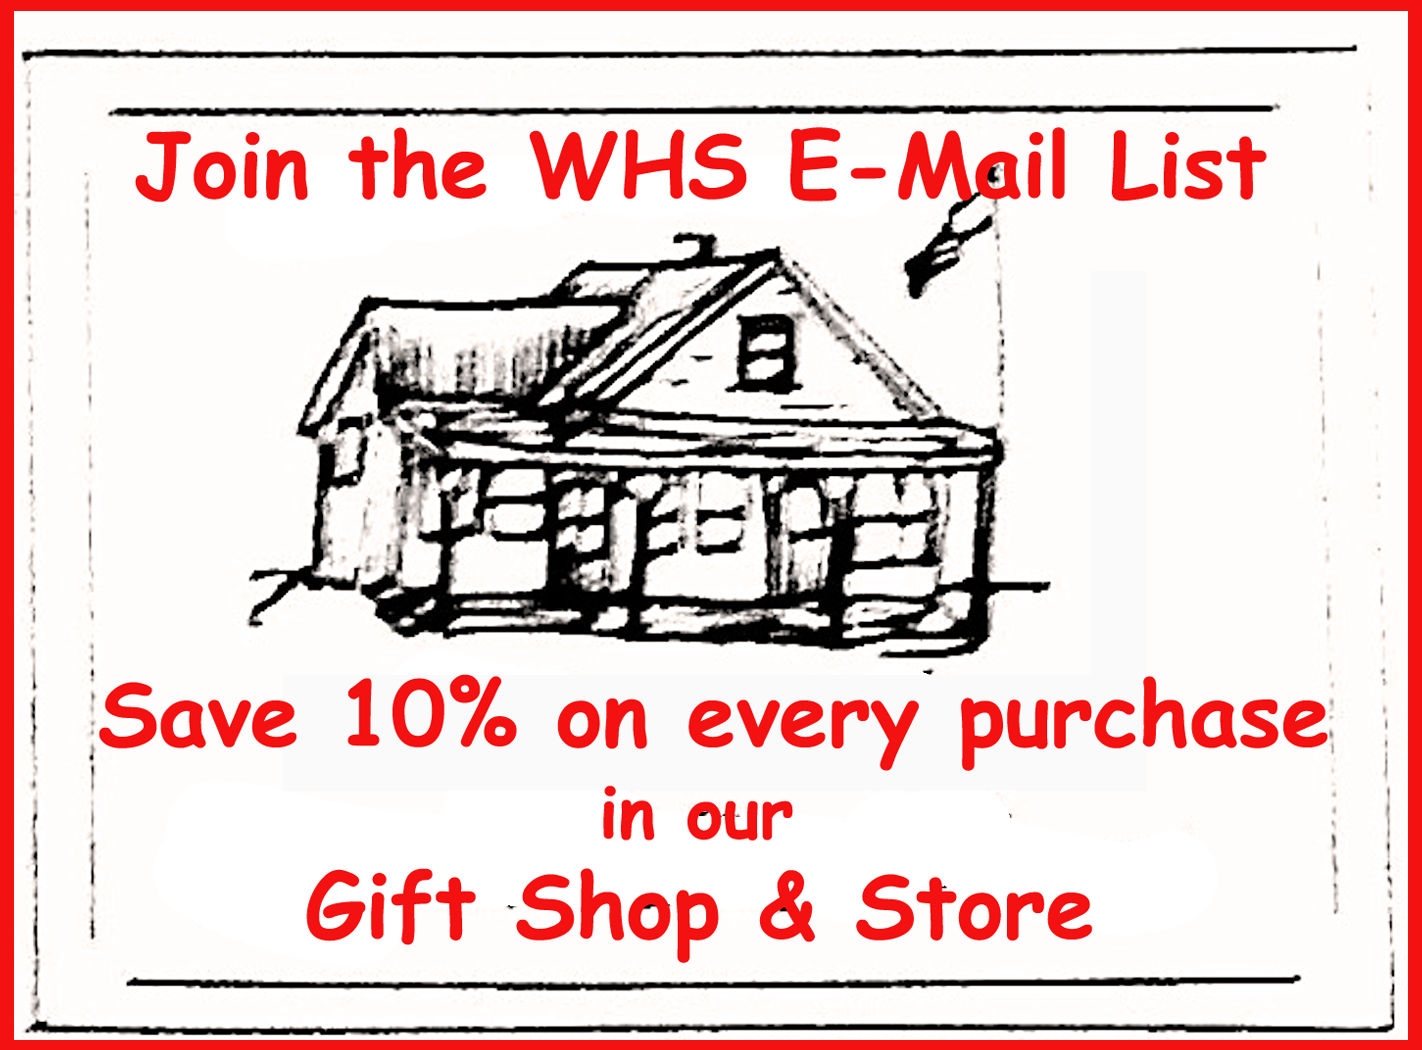 Support local Artists at the WHS Store & Gift Shop